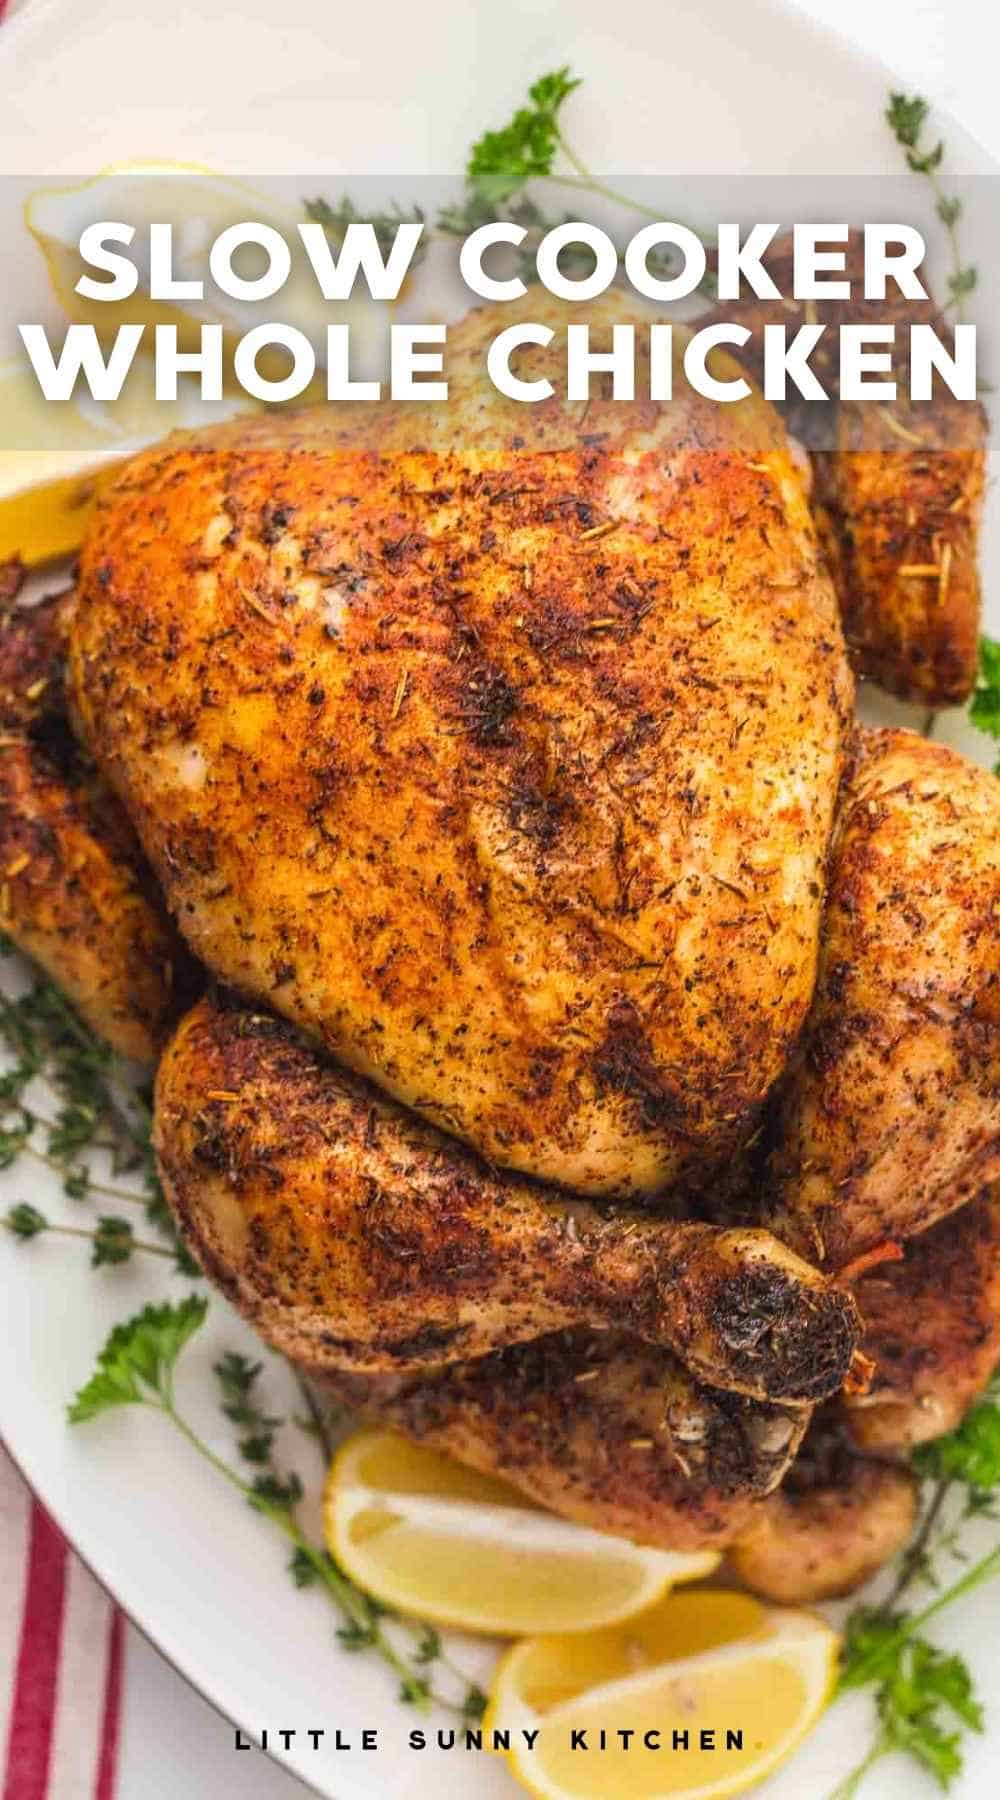 Slow Cooker Whole Chicken - Little Sunny Kitchen